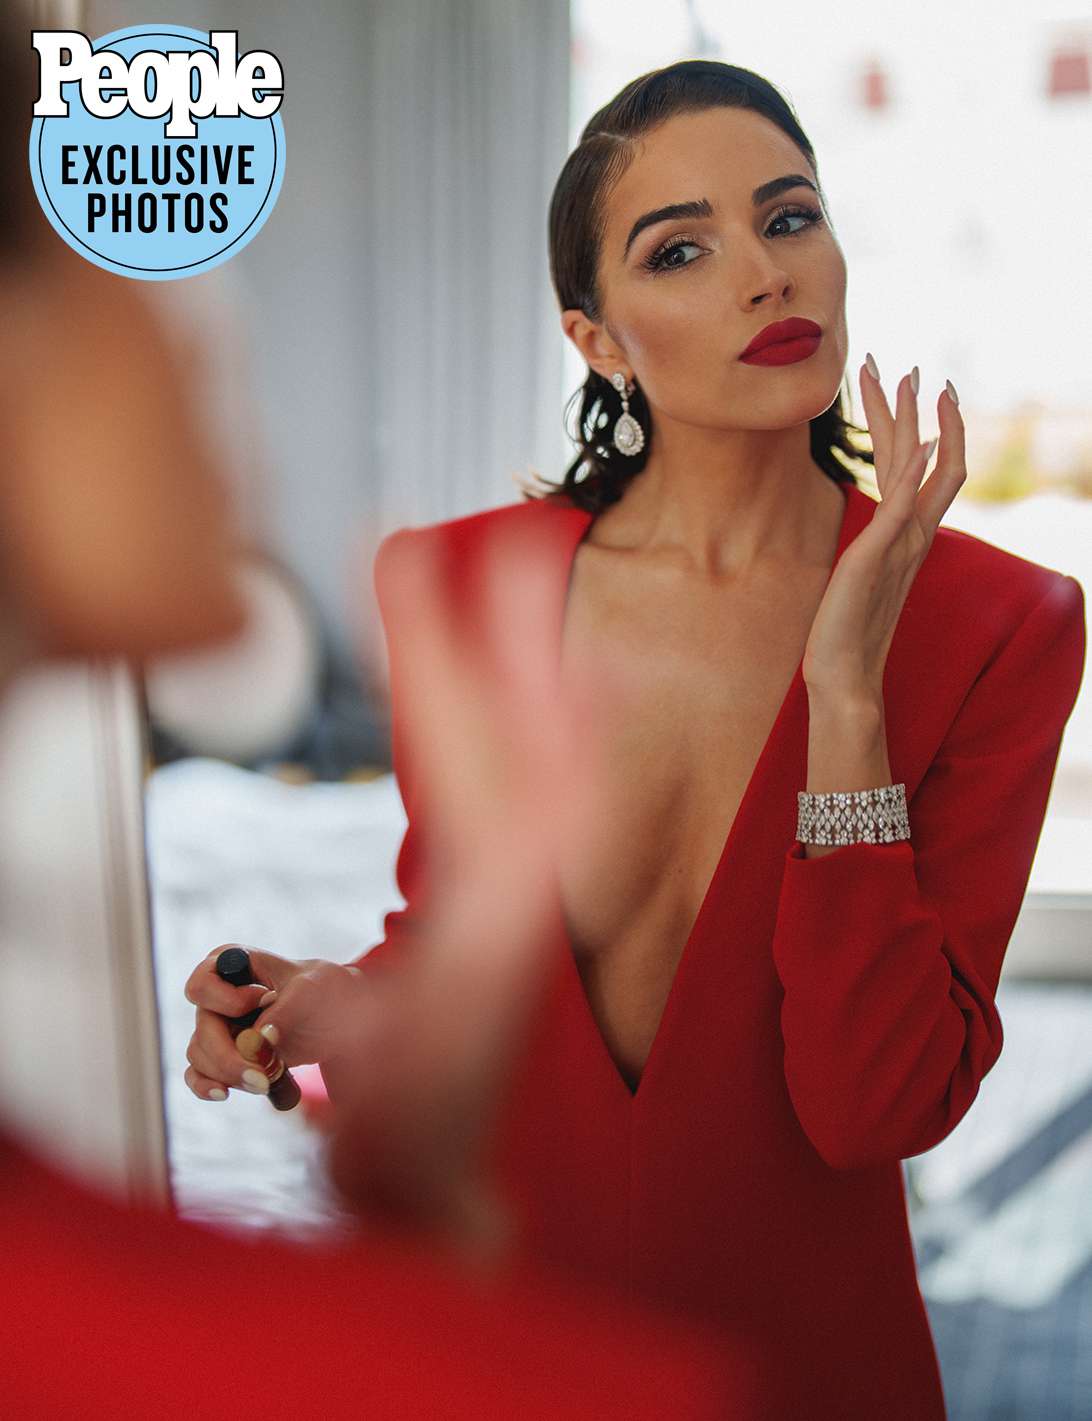 PEOPLE x Celebrity & Model OLIVIA CULPO   Exclusive AmfAR Gala in Cannes  Photo Diary